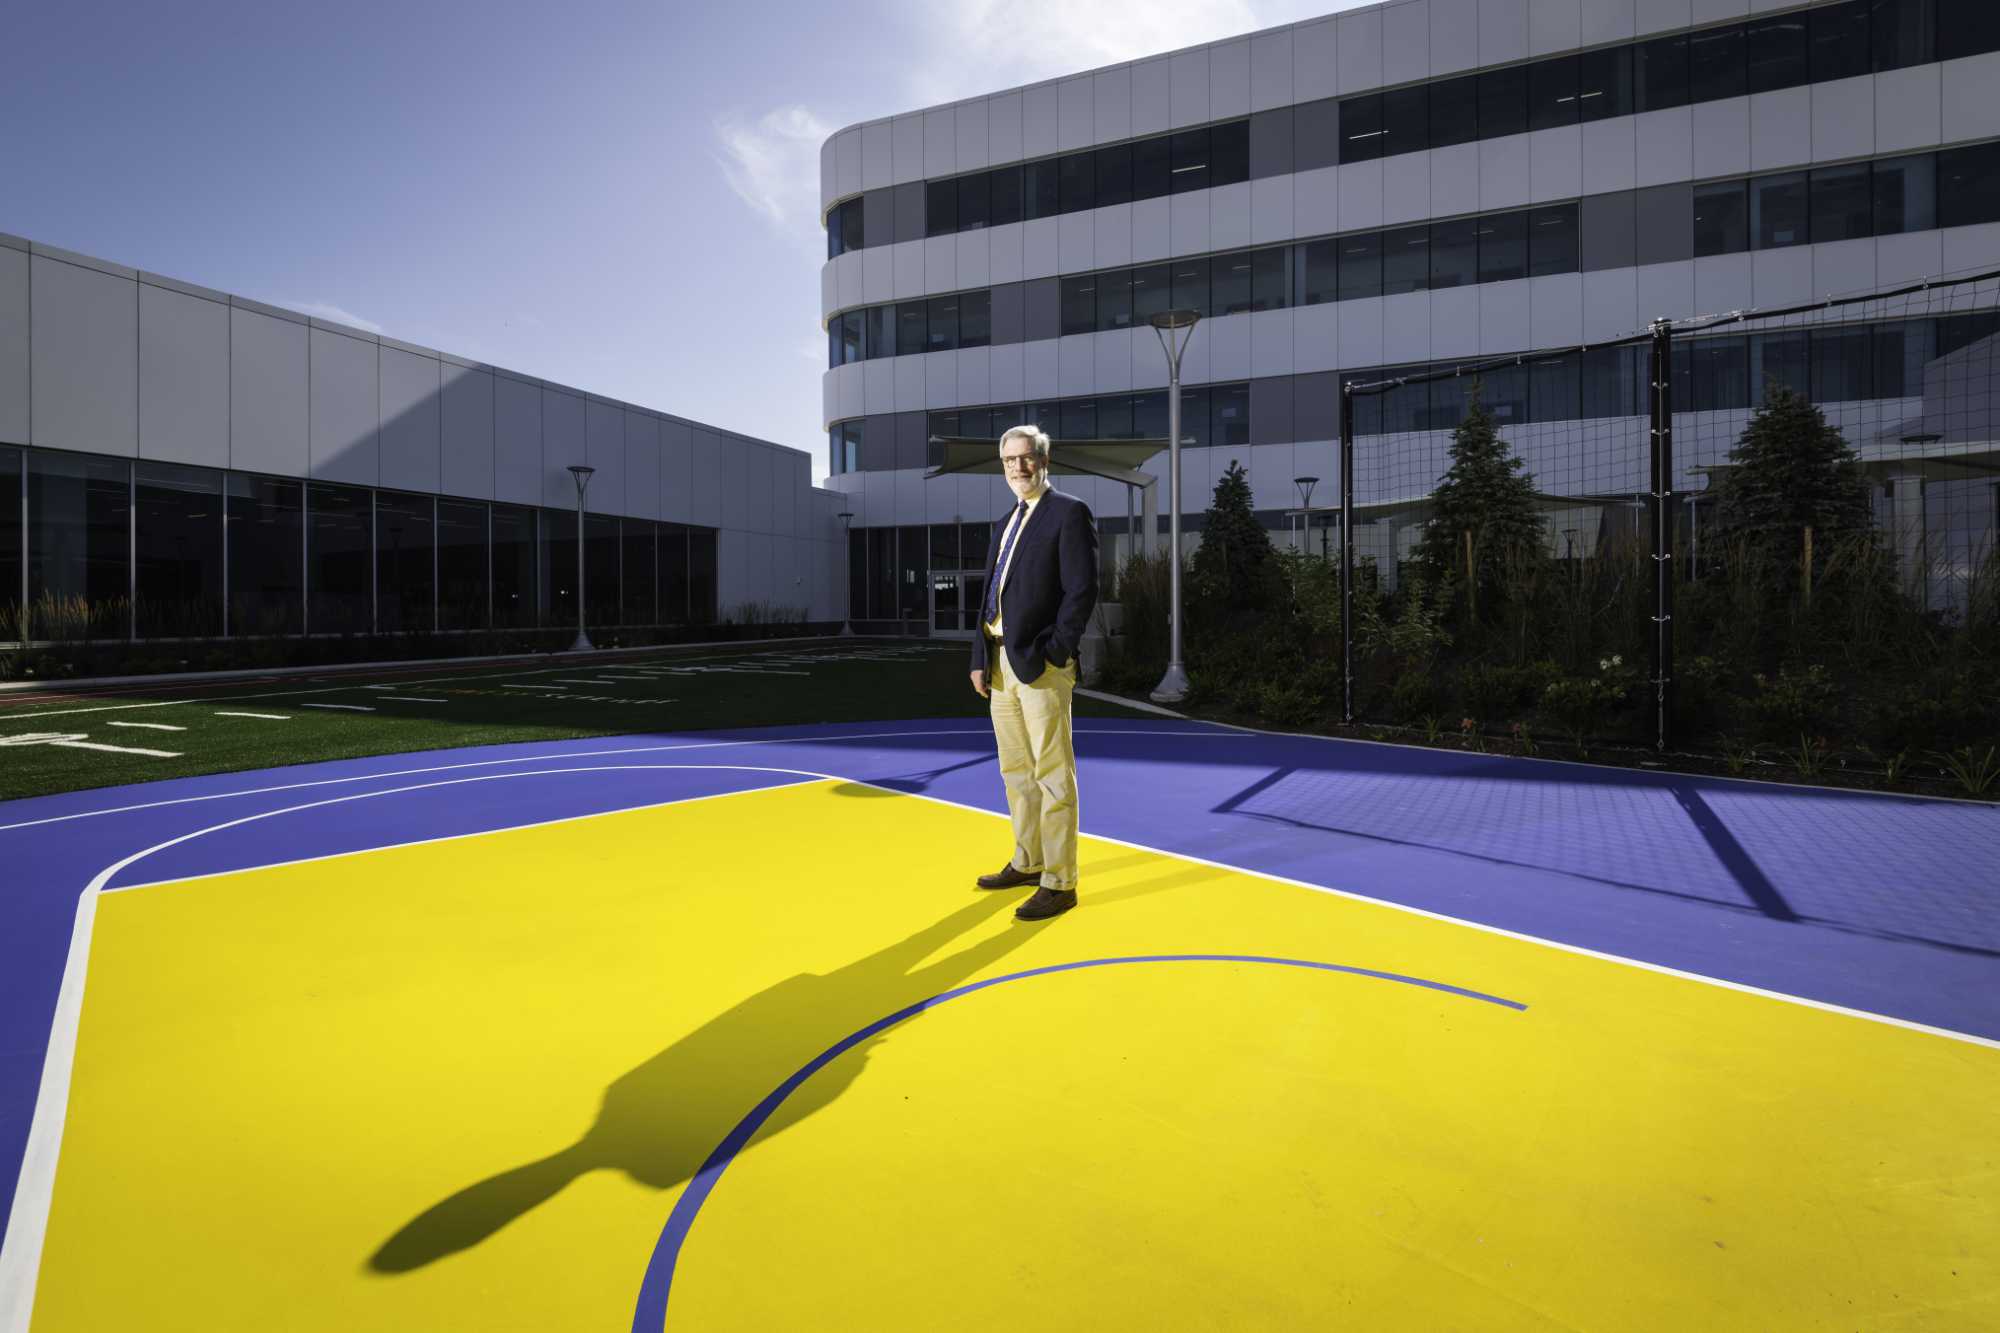 Paul Rubery in the outdoor courtyard of the new orthopeadic center featuring a small football field and a blue-and-yellow basketball court.